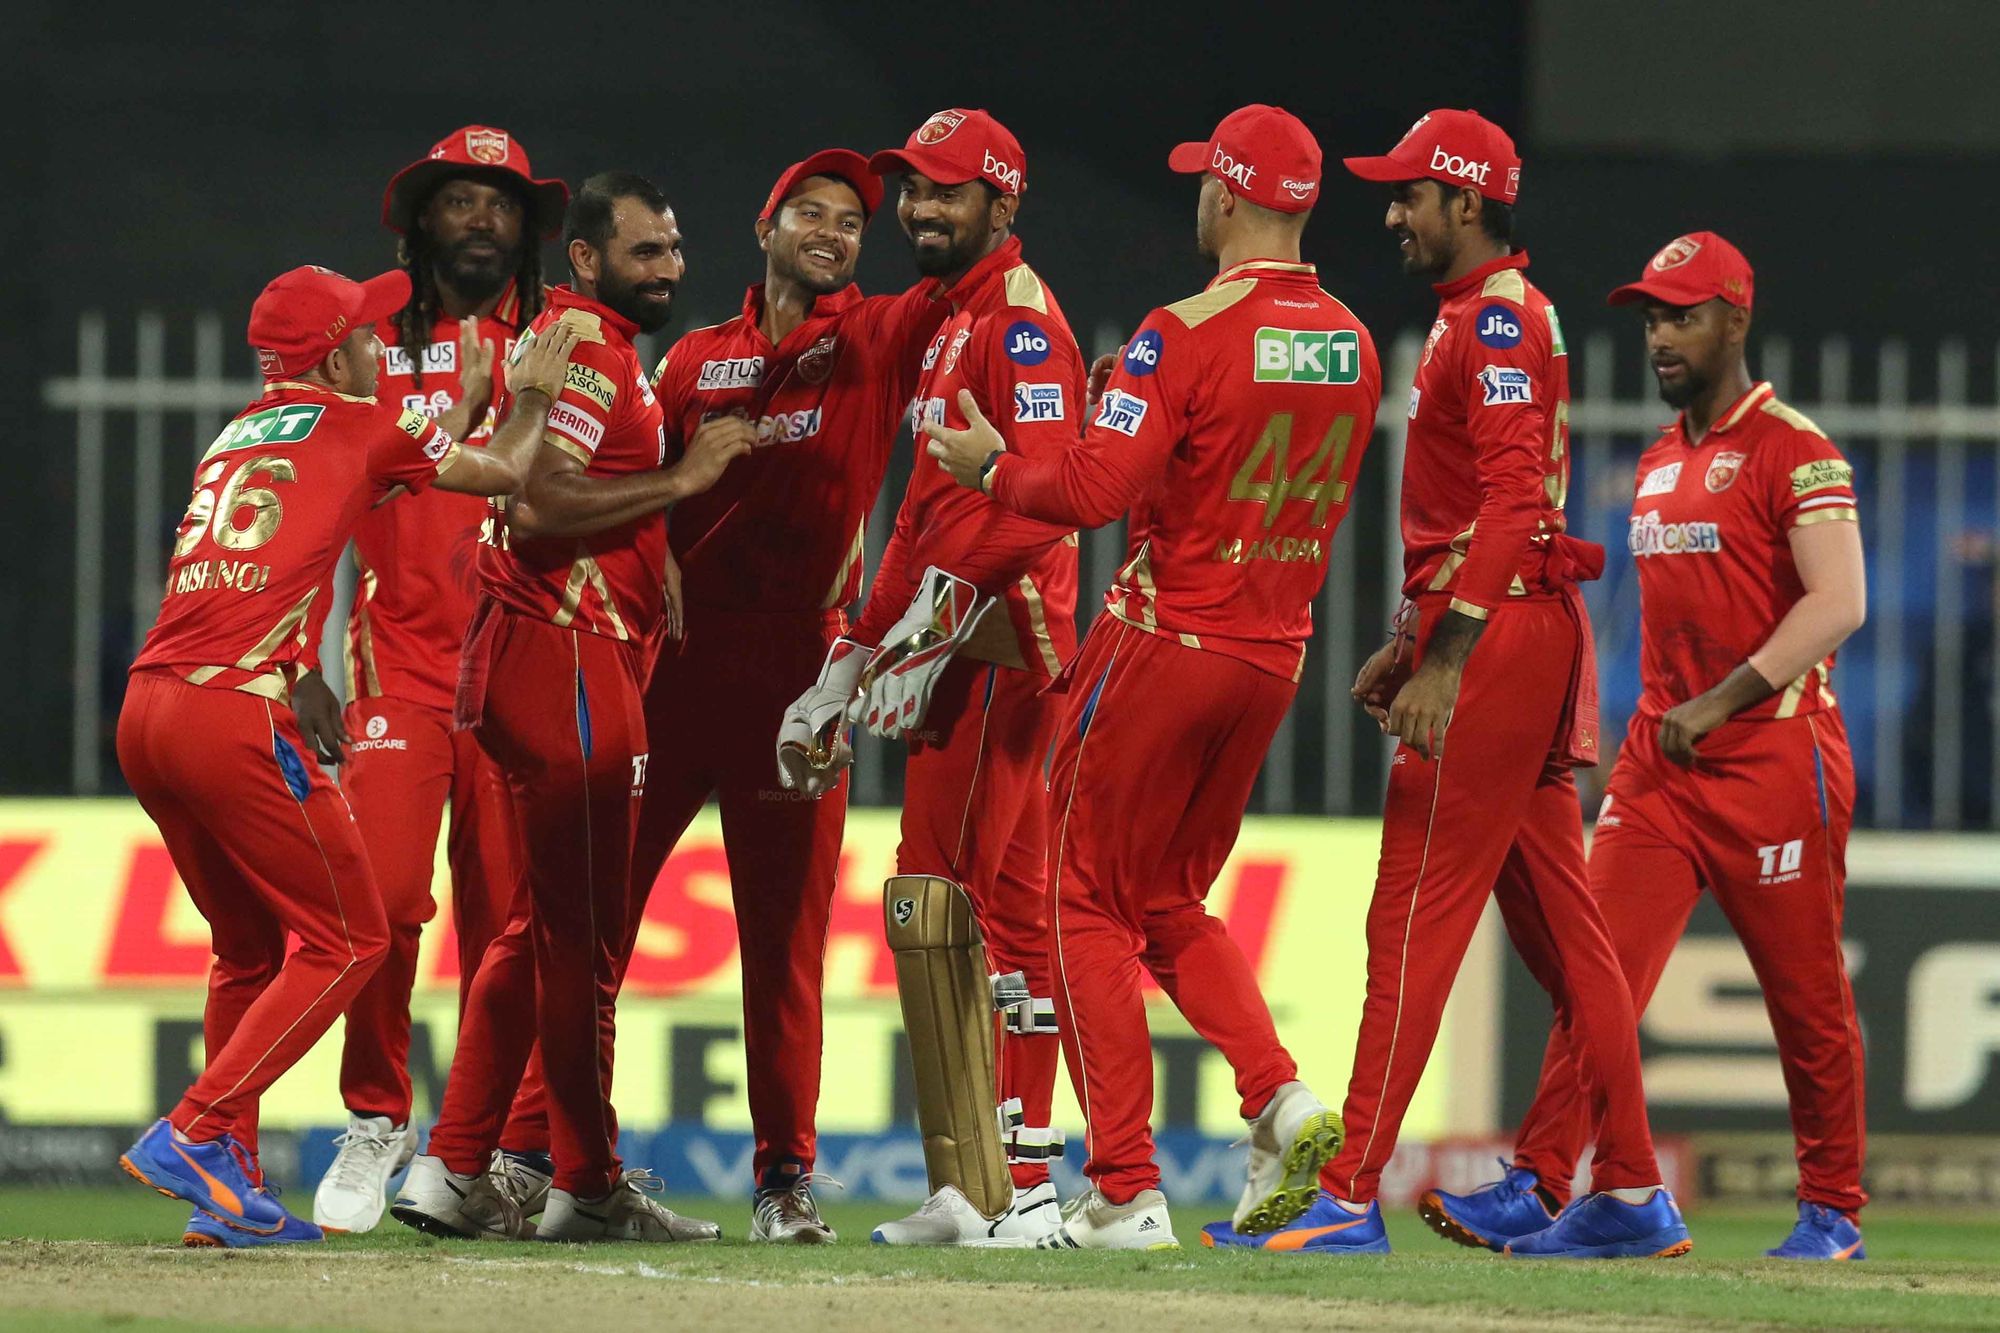 Punjab Kings (PBKS) is ranked 5th in the IPL 14 points table | BCCI/IPL